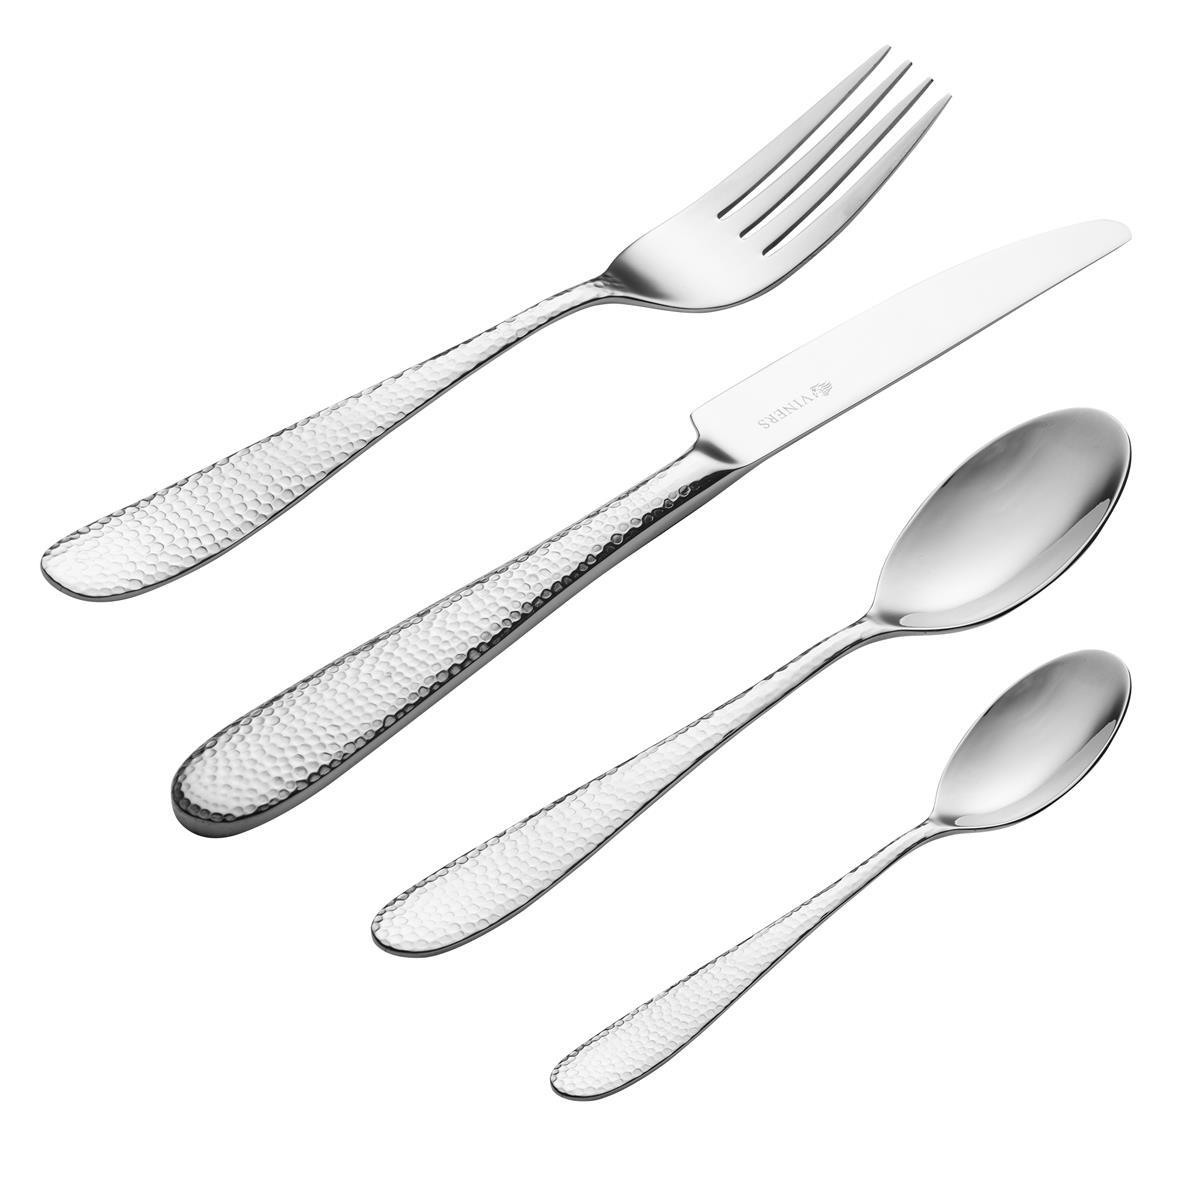 What is the material of the Viners Glamour Cutlery set?